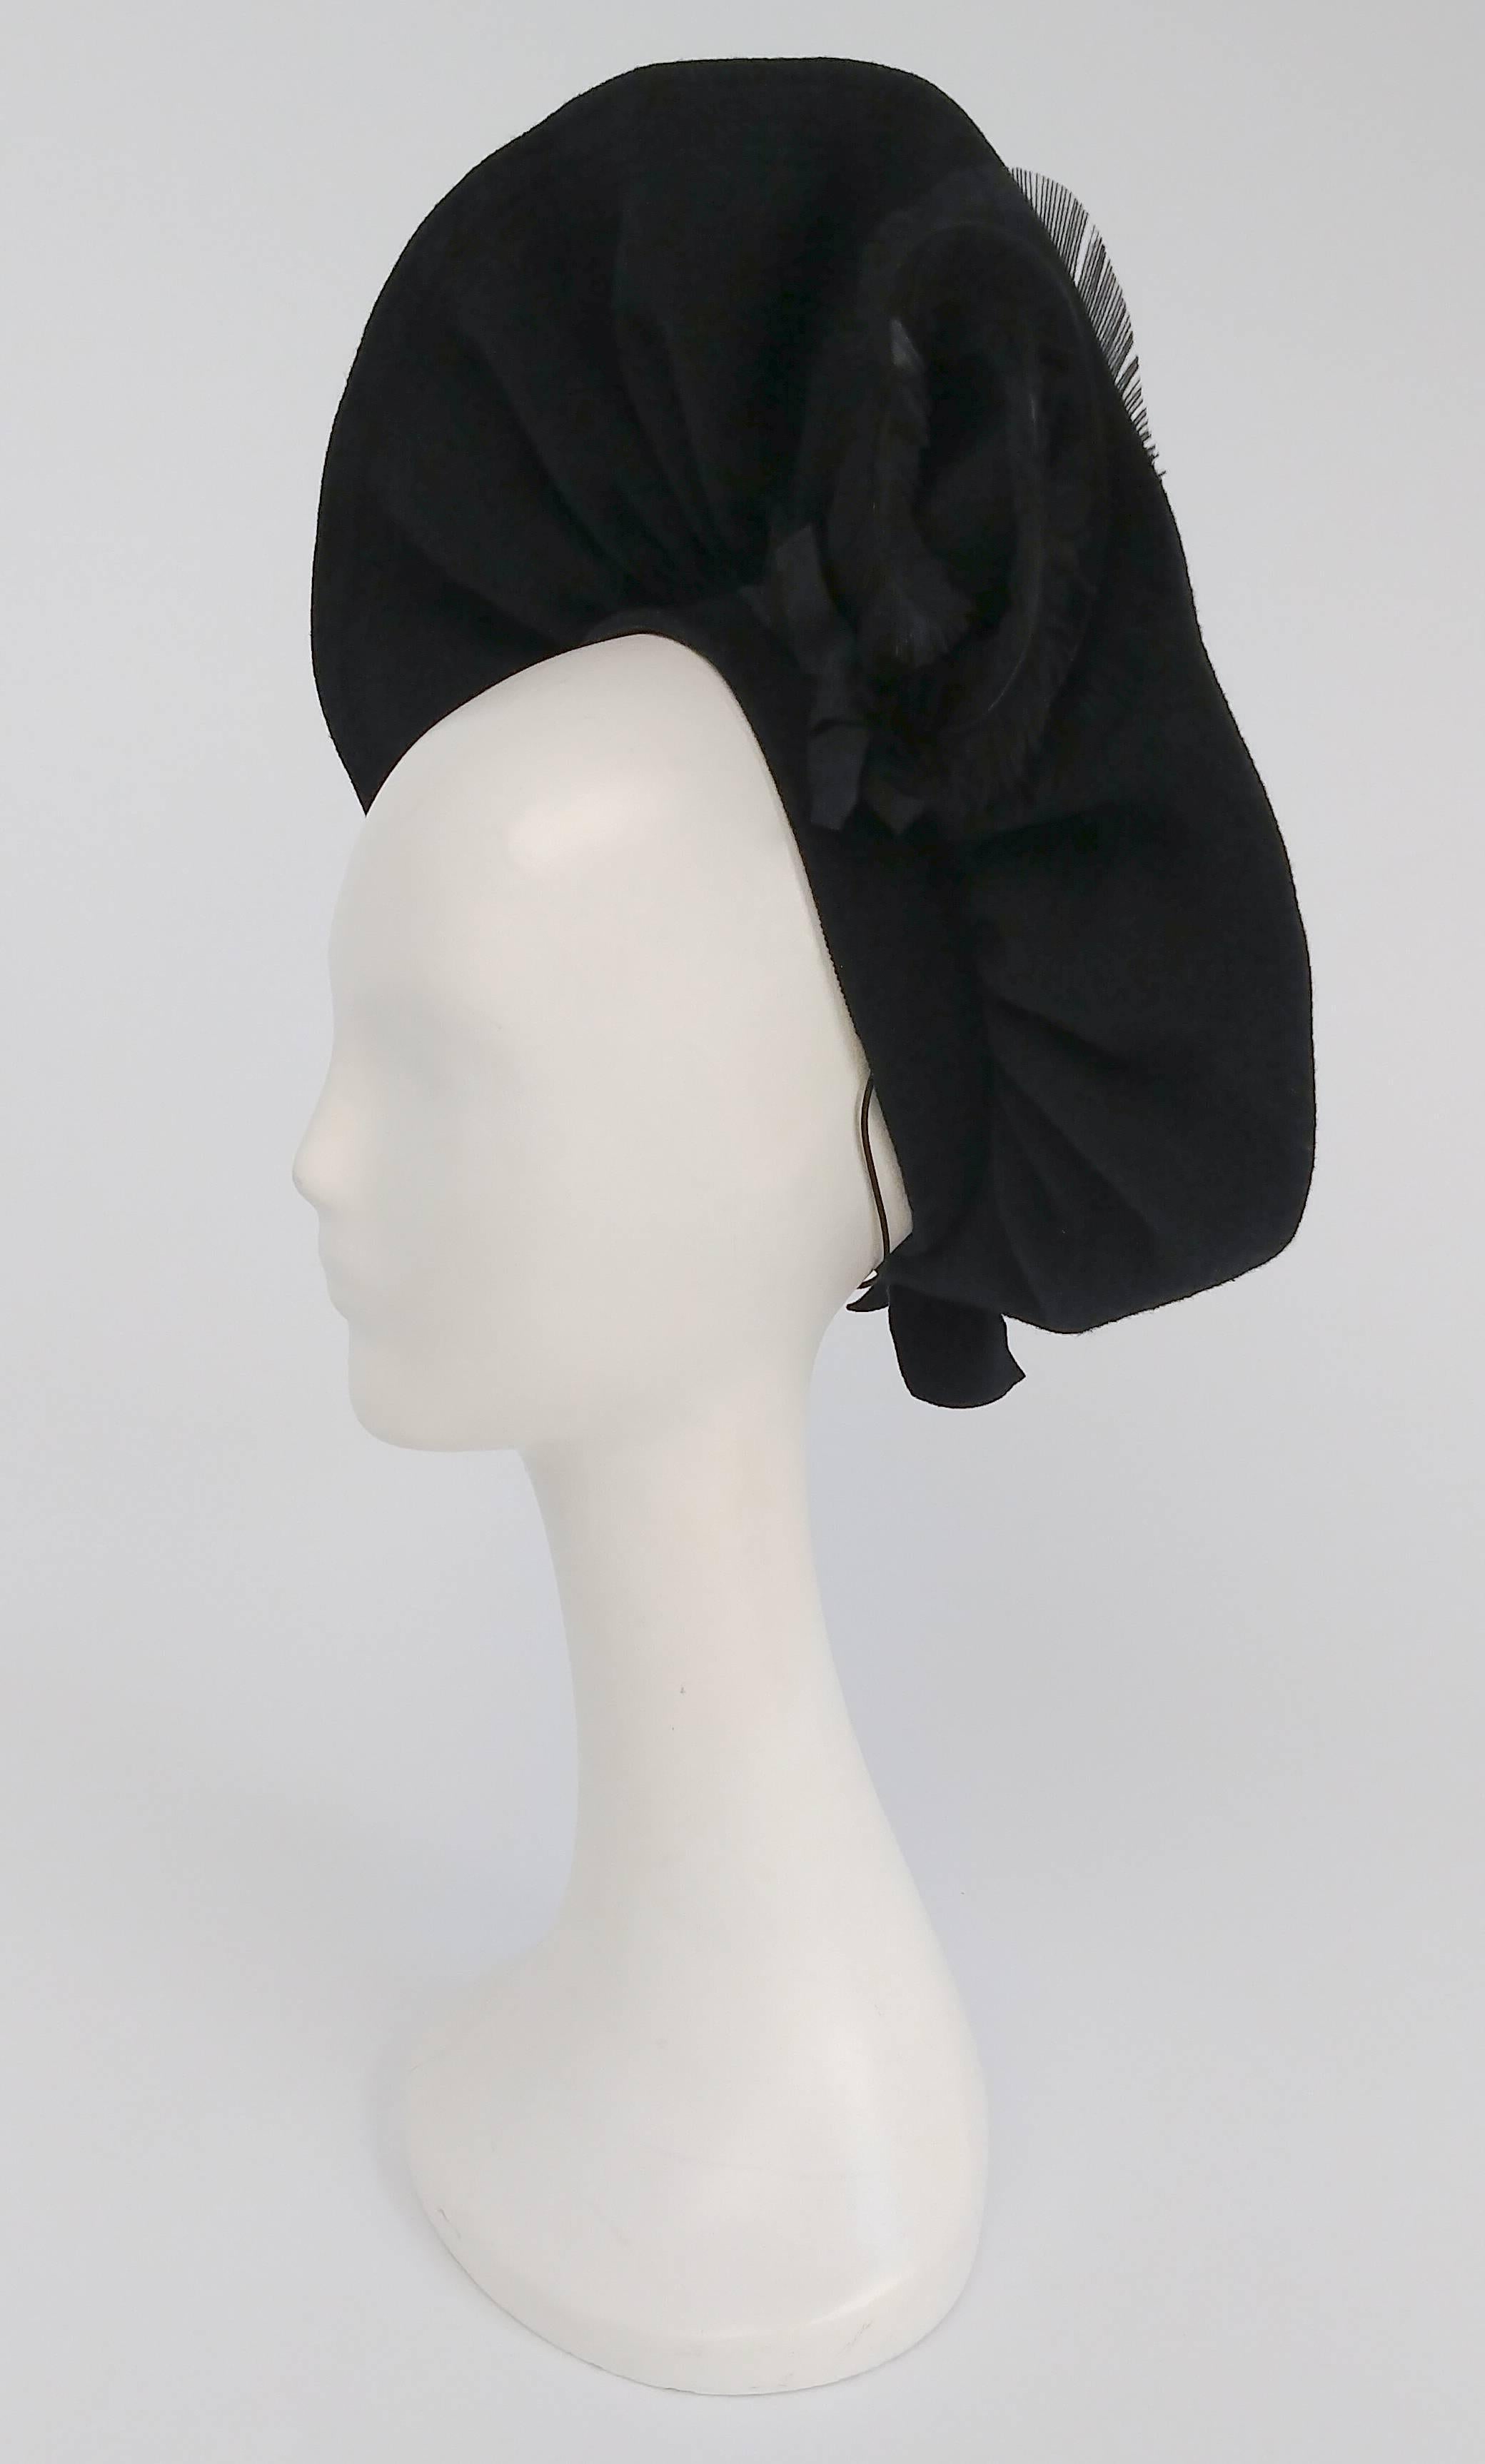 1940s Black Wool Ruffled Hat w/ Curled Feather. Black hat sits on the back of head, held in place with elastic band. 